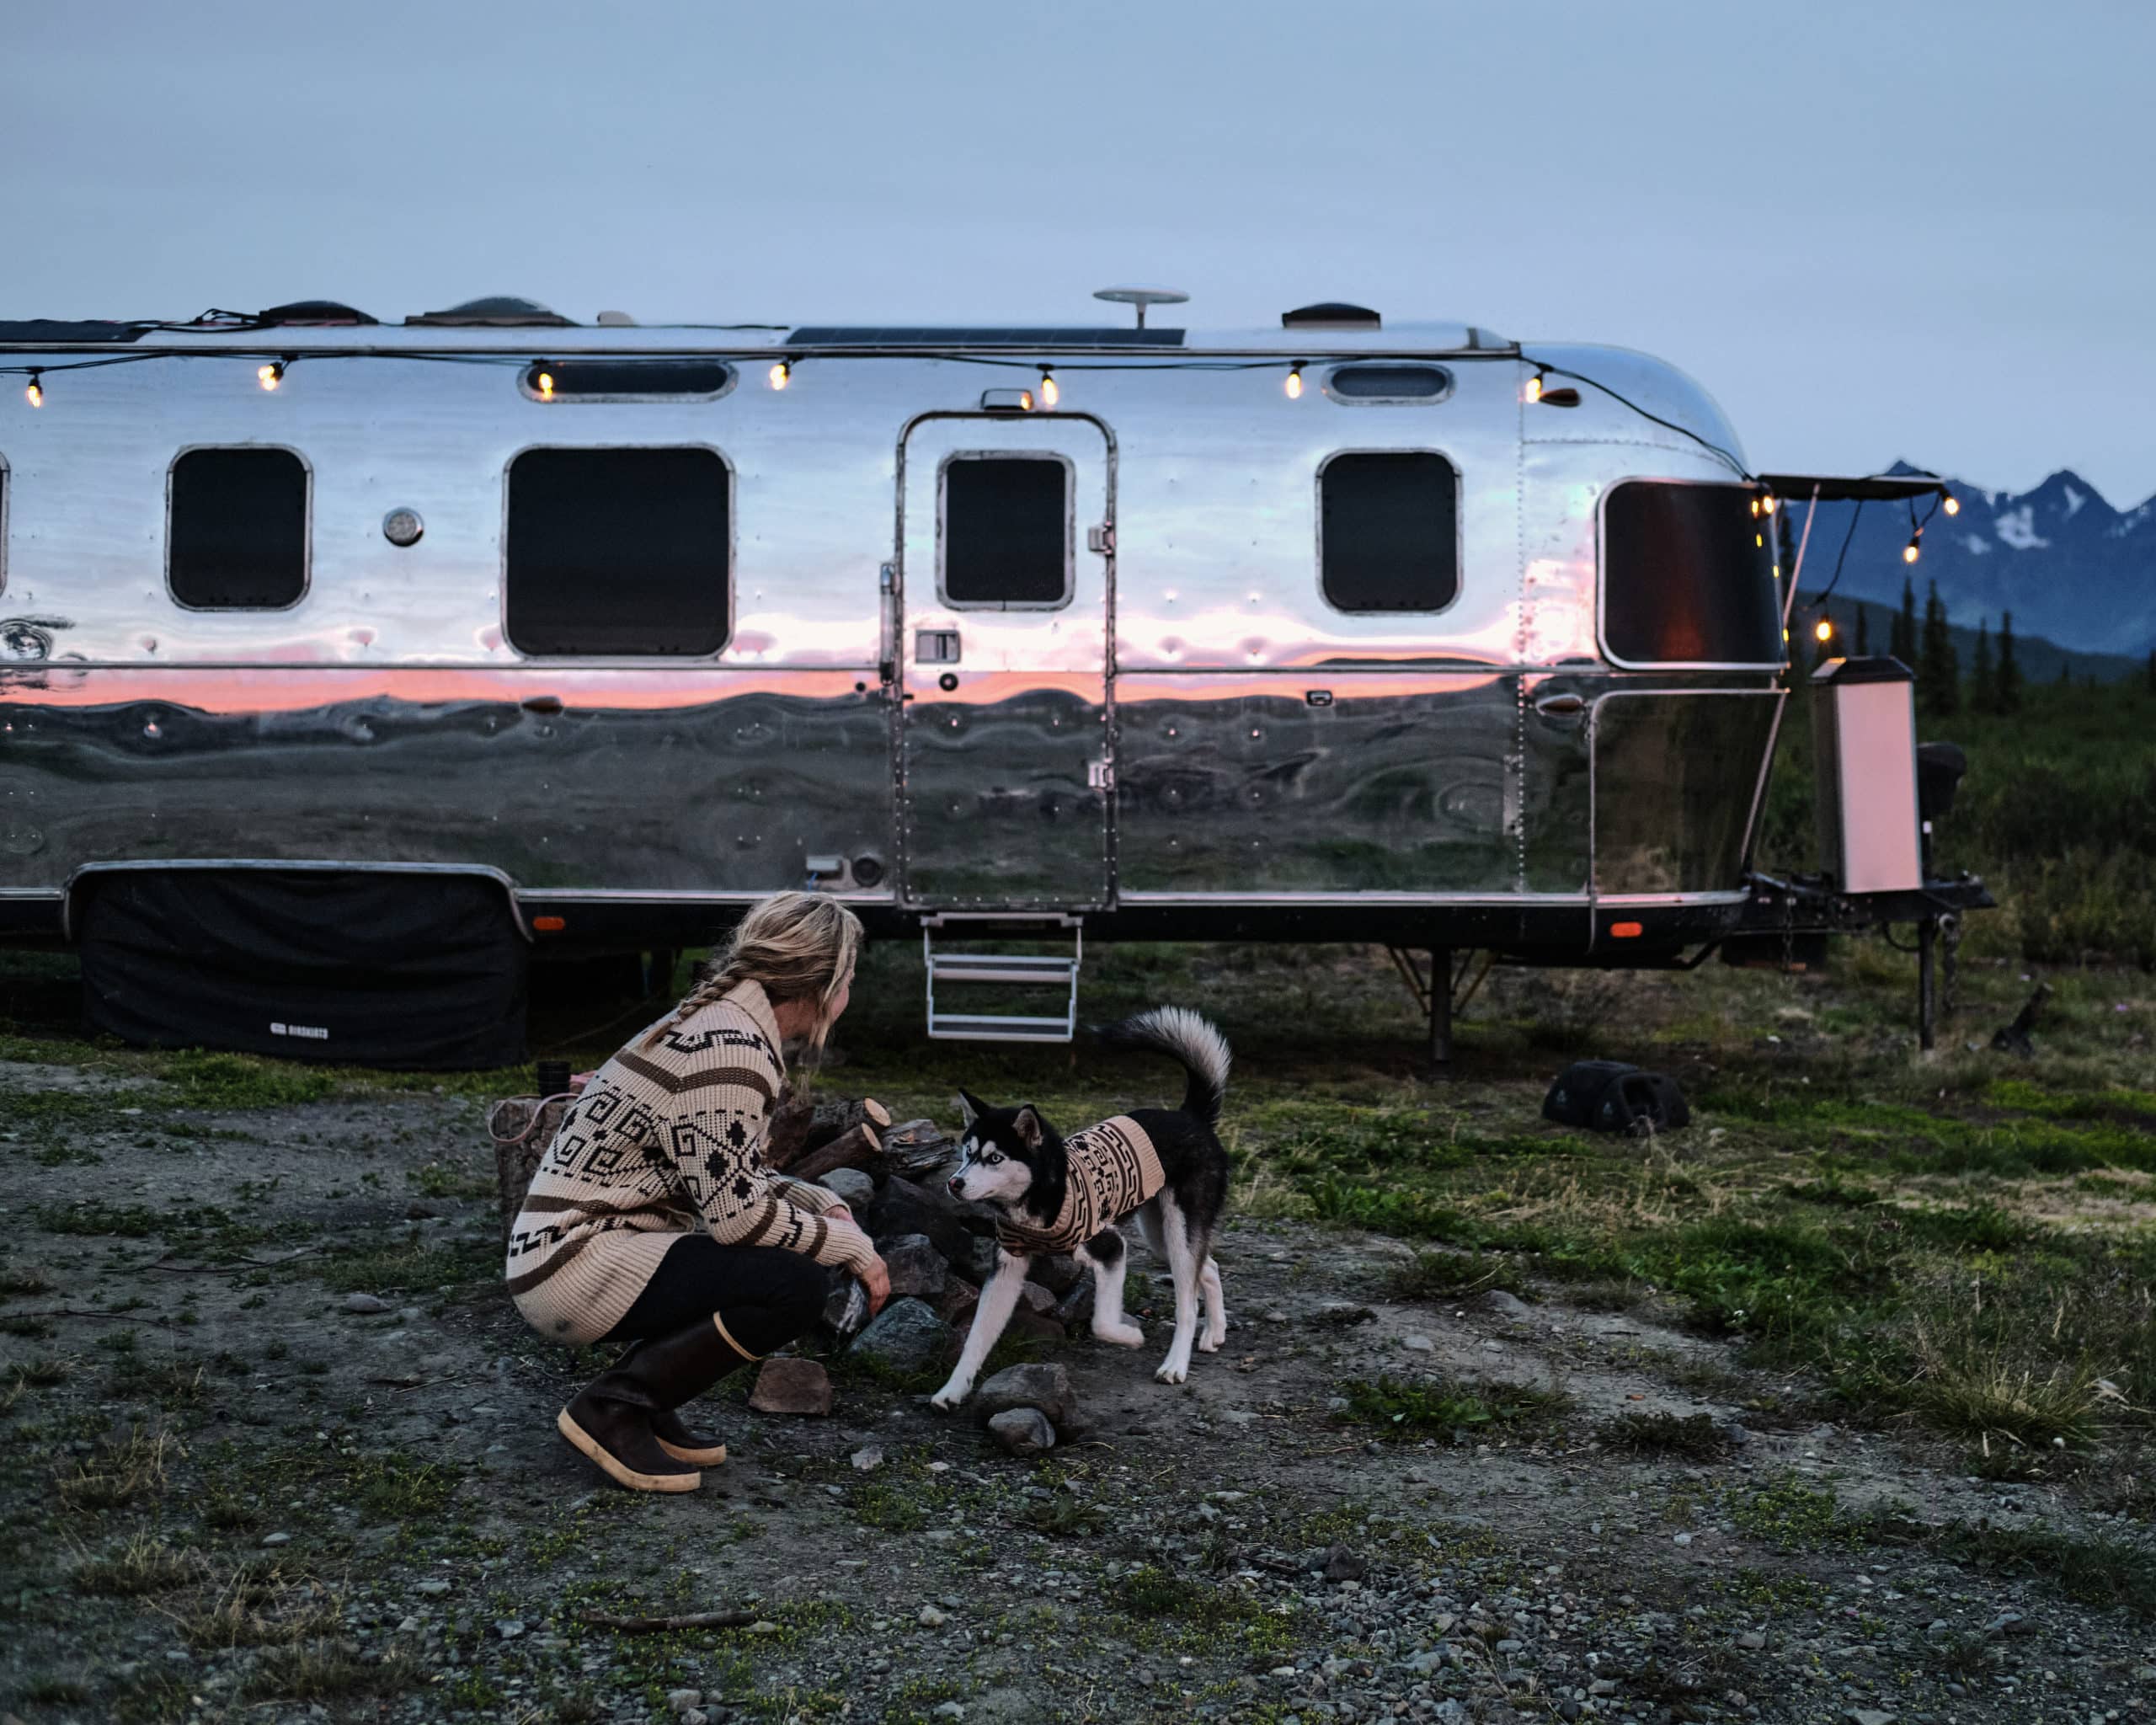 Kendall Strachan and Her Puppy in Front of Their Airstream